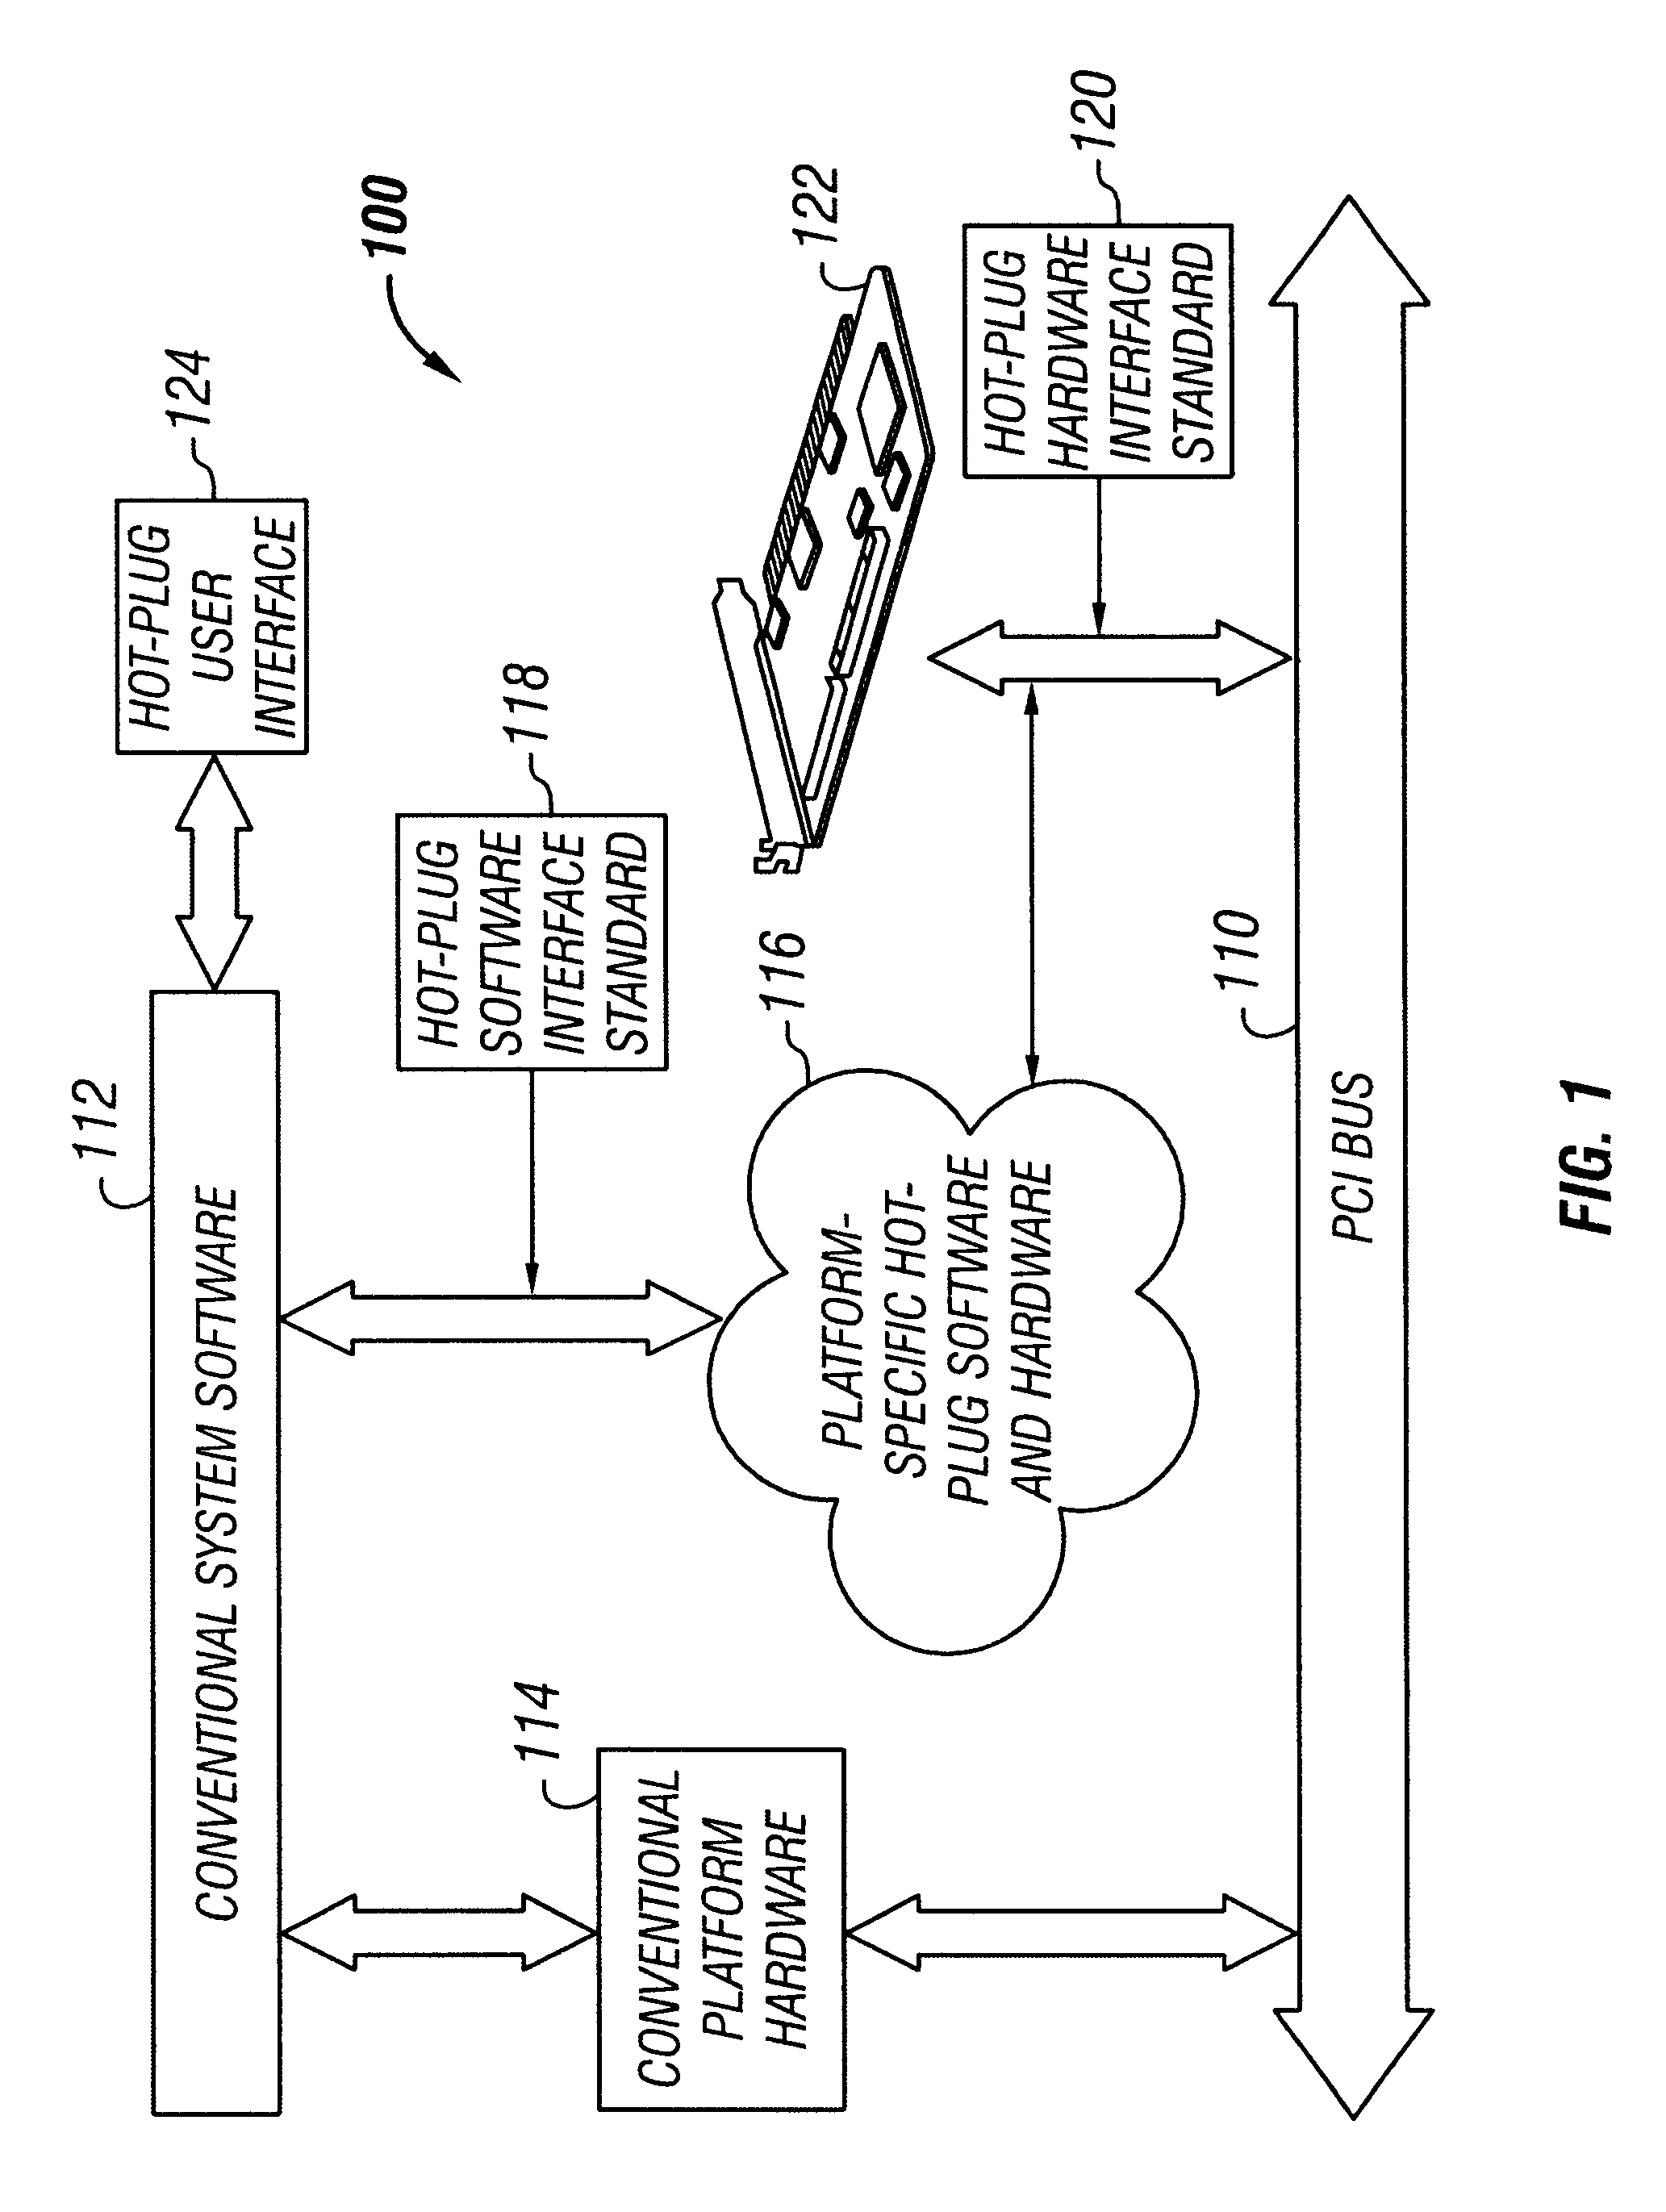 Hot-plug interface for detecting adapter card insertion and removal